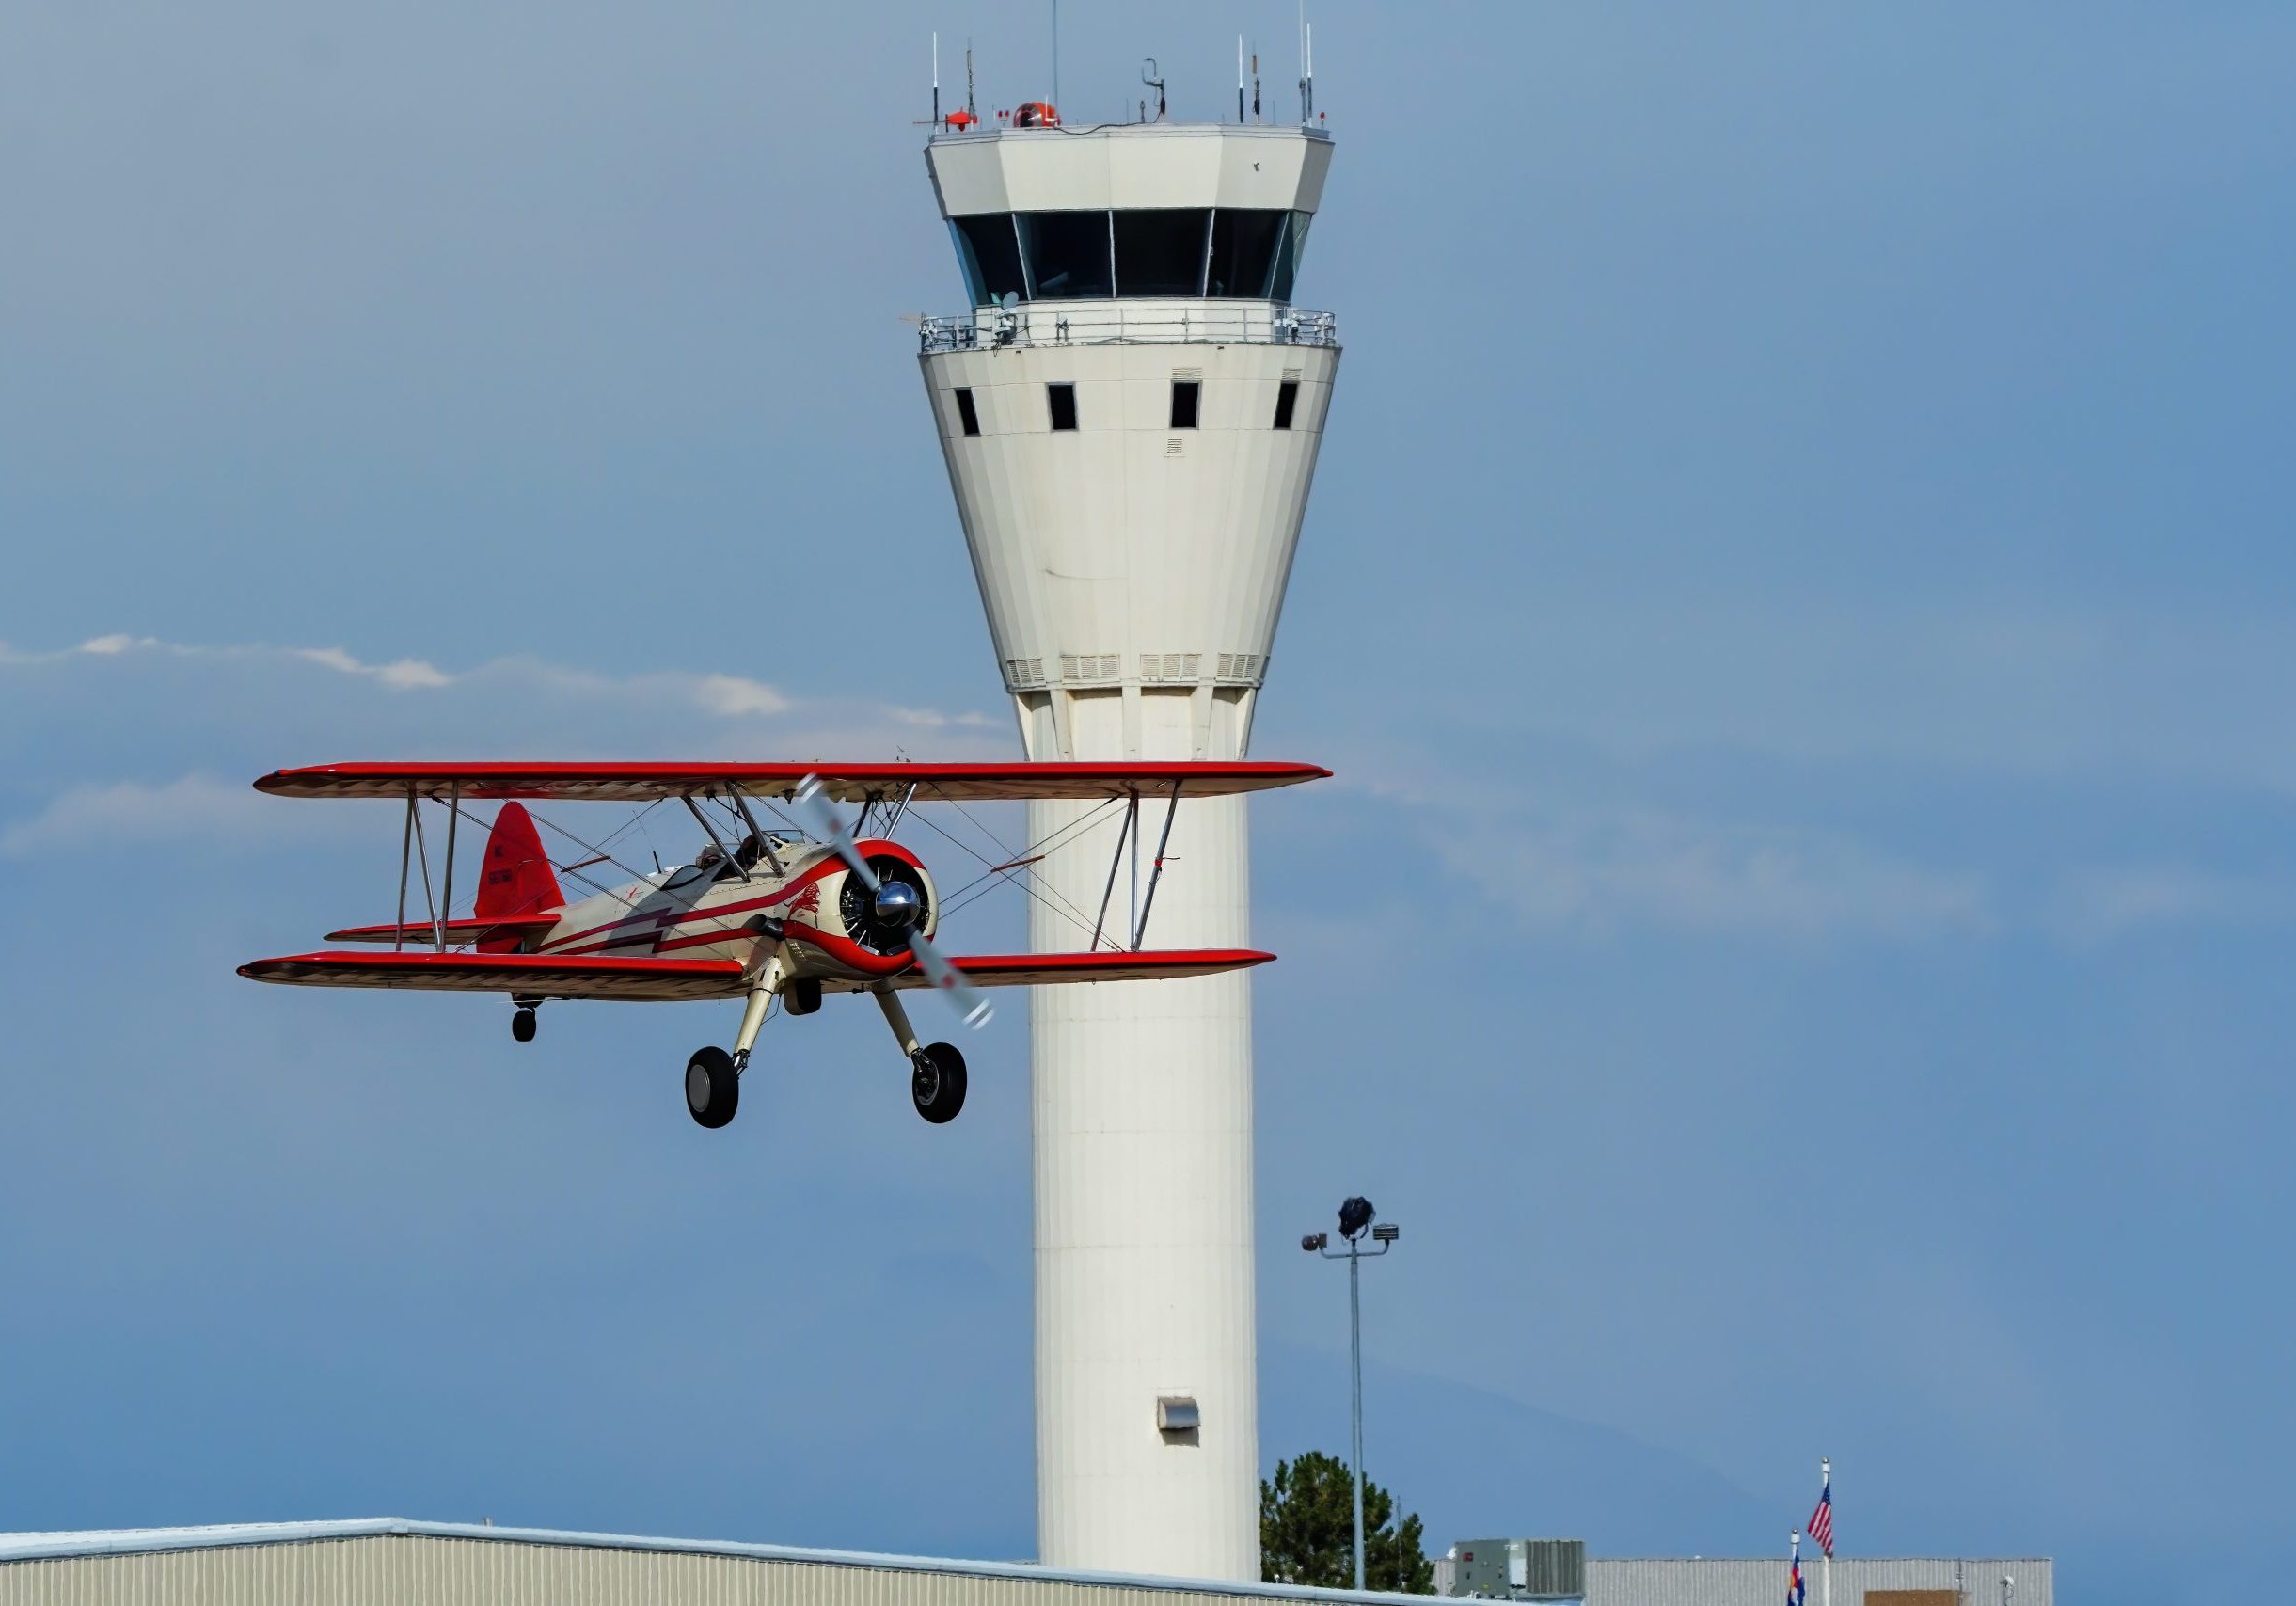 CENTENNIAL, USA-OCTOBER 17: Boeing Stearman airplane lands on October 17, 2020 at Centennial airport near Denver, Colorado. This airport is one of the busiest general aviation airports in the United States.